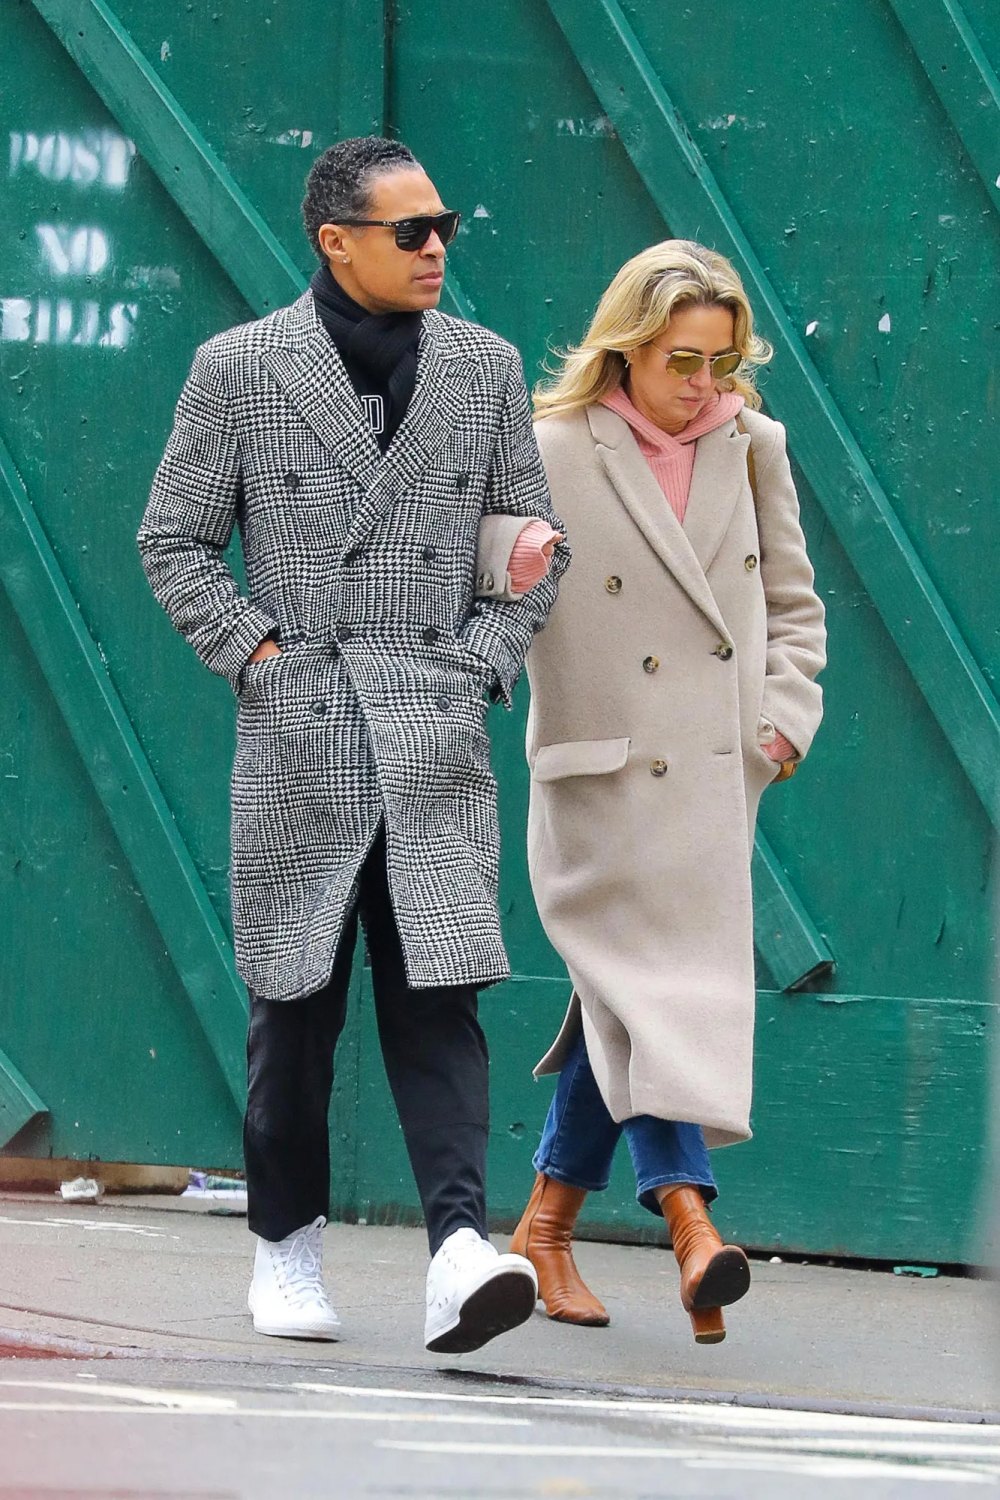 Amy Robach and T.J. Holmes Enjoy NYC Stroll Before Andrew Shue and Marilee Fiebig Left on a Getaway